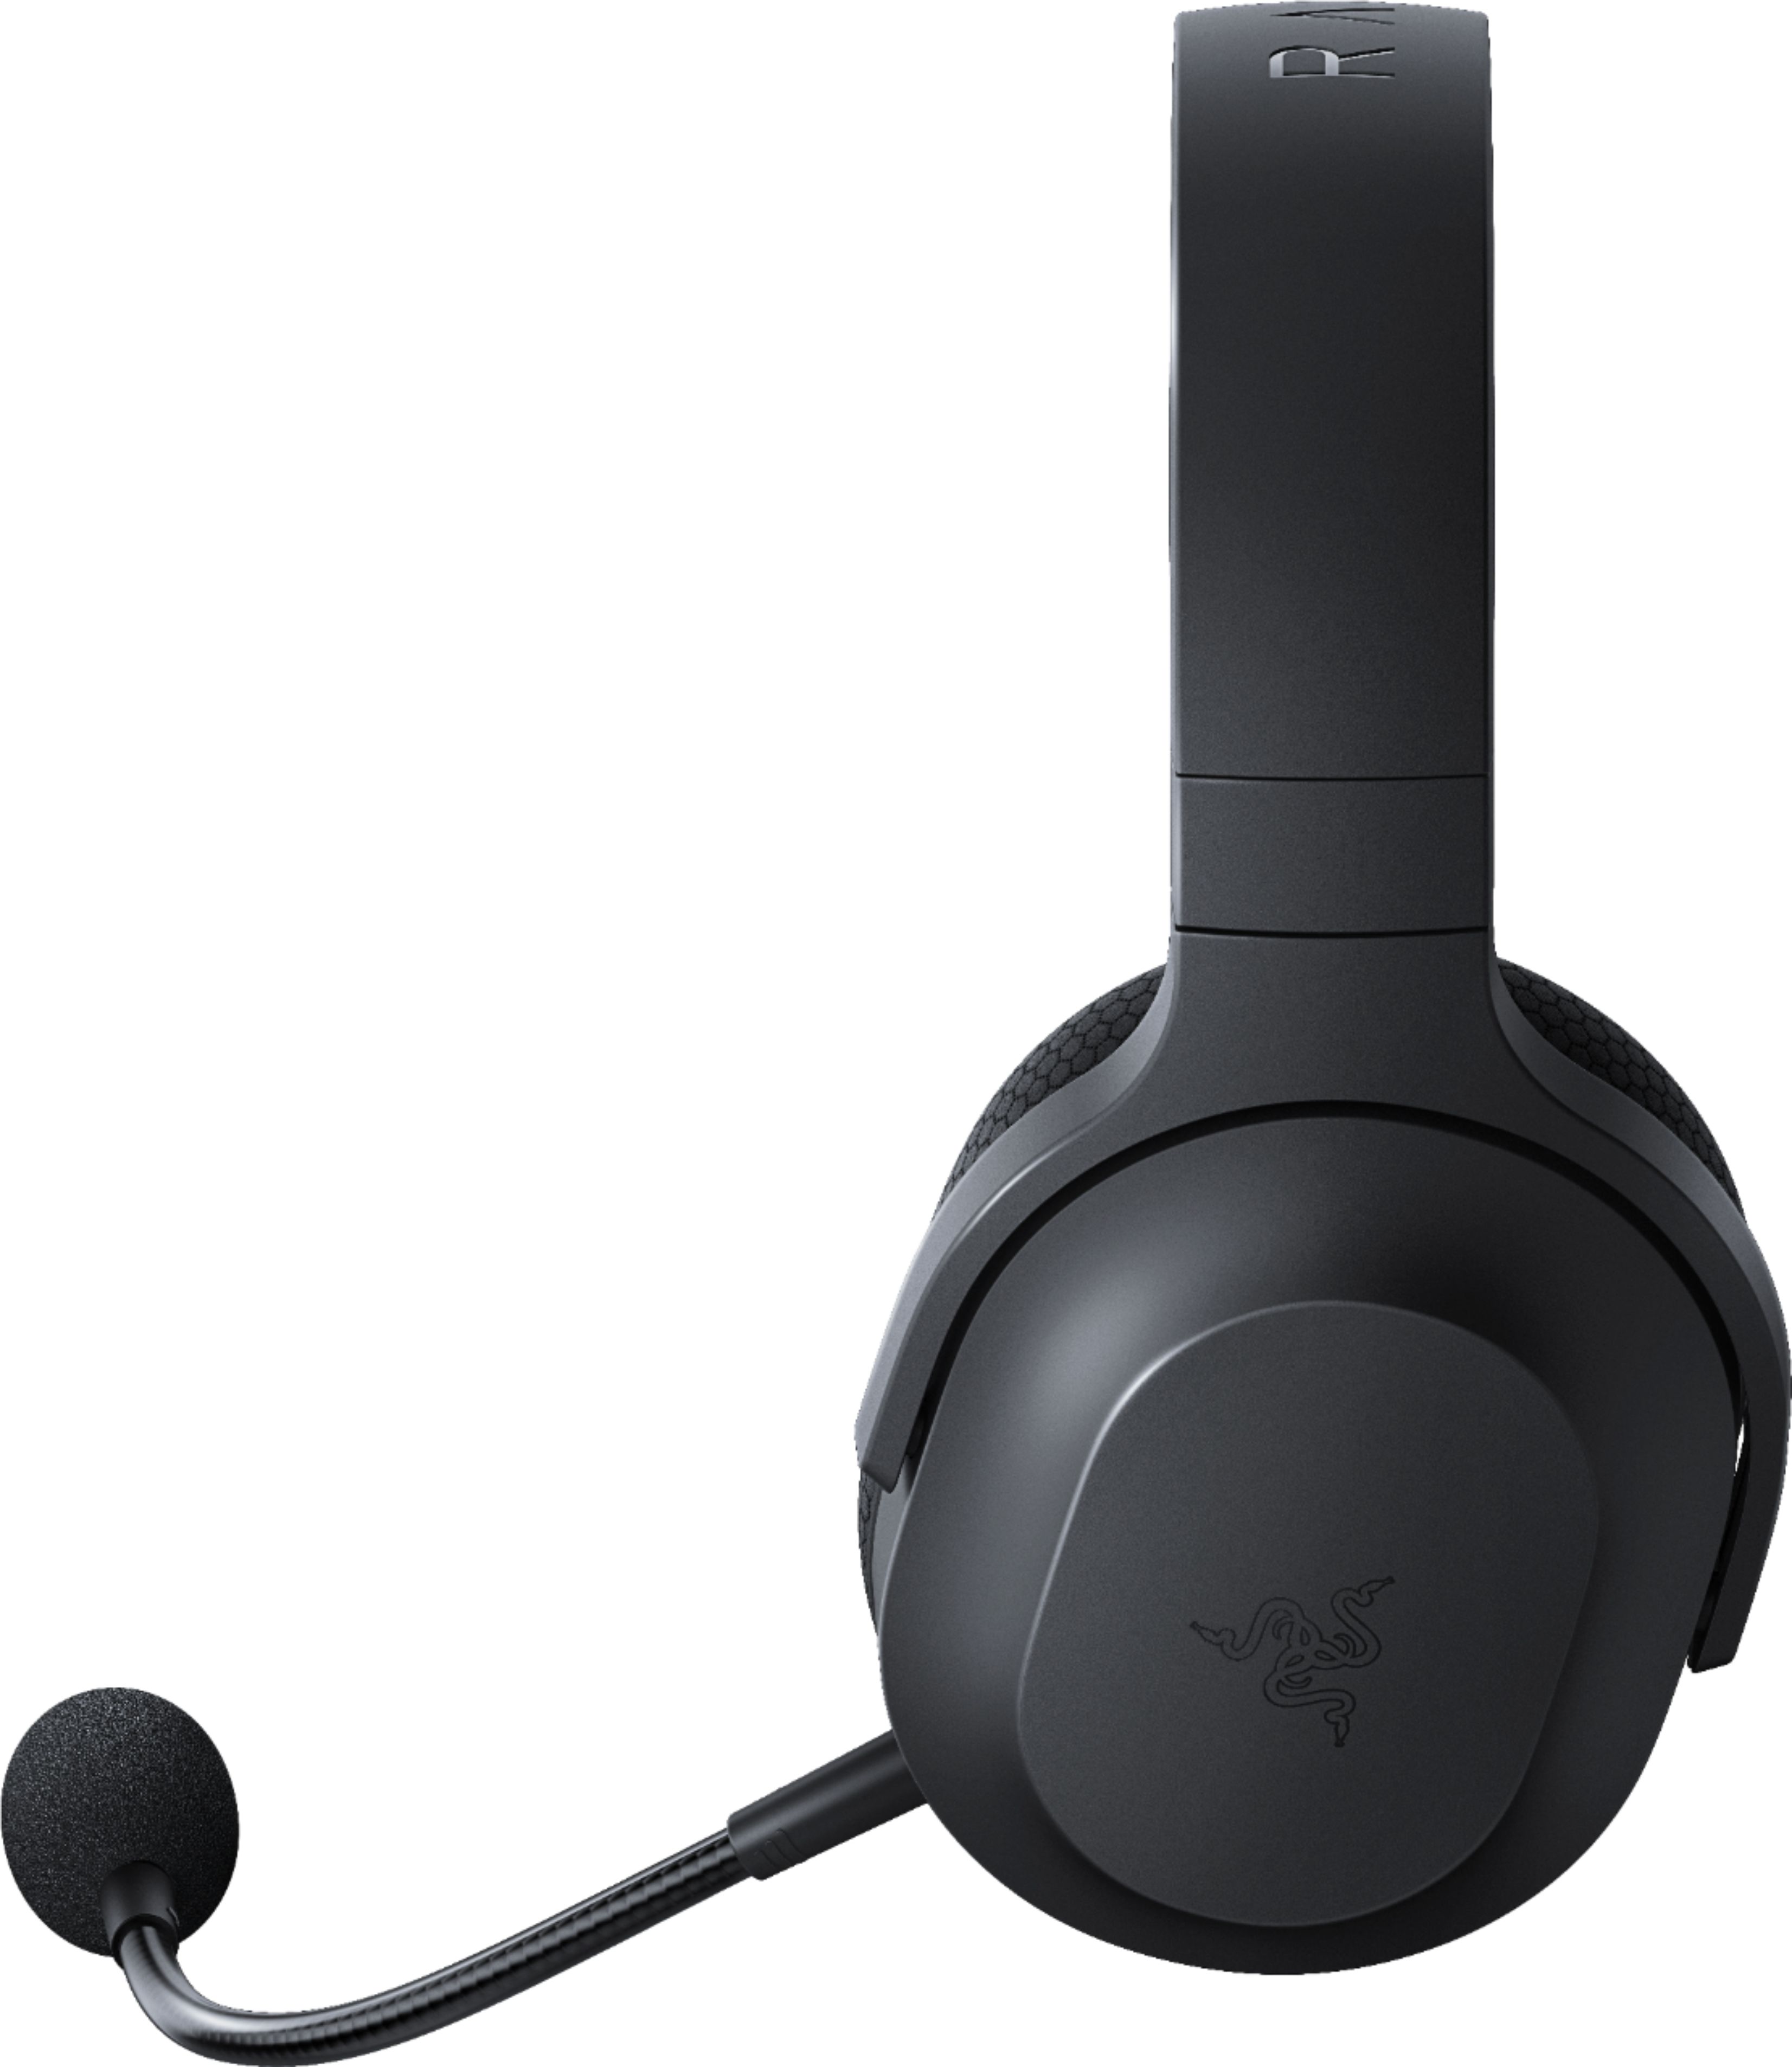  Razer Barracuda X Wireless Gaming & Mobile Headset (PC,  Playstation, Switch, Android, iOS): 2.4GHz Wireless + Bluetooth -  Lightweight - 40mm Drivers - Detachable Mic - 50 Hr Battery - Roblox  Edition : Video Games